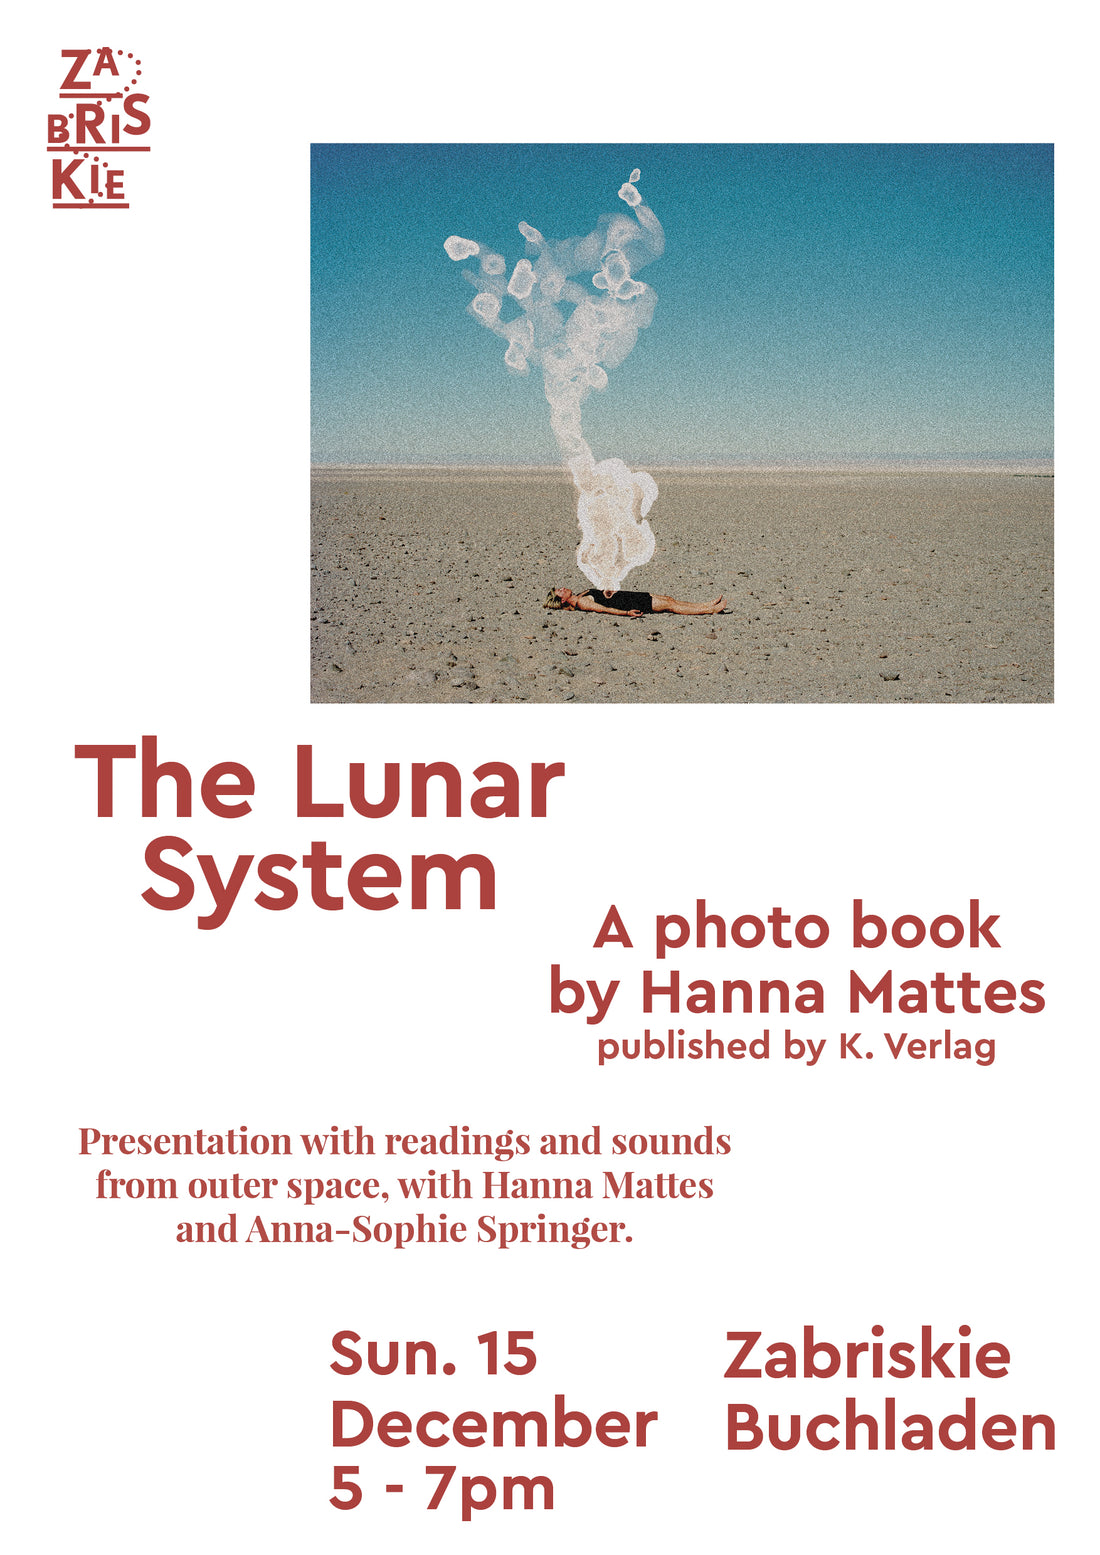 The Lunar System - Presentation with readings and sounds from outer space, with Hanna Mattes and Anna-Sophie Springer.